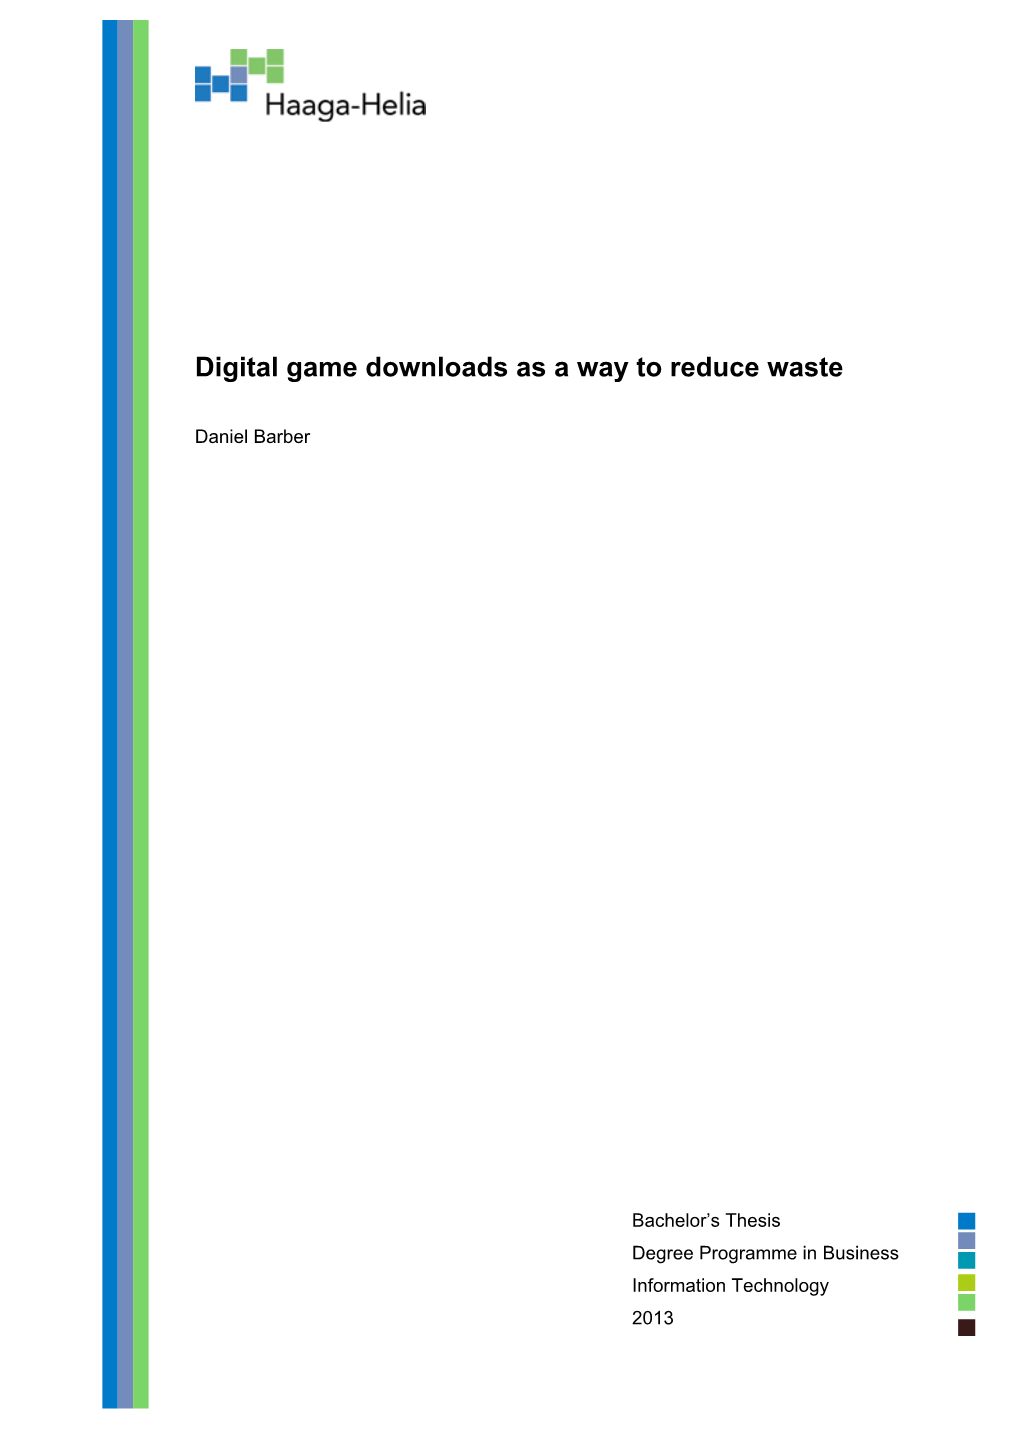 Digital Game Downloads As a Way to Reduce Waste